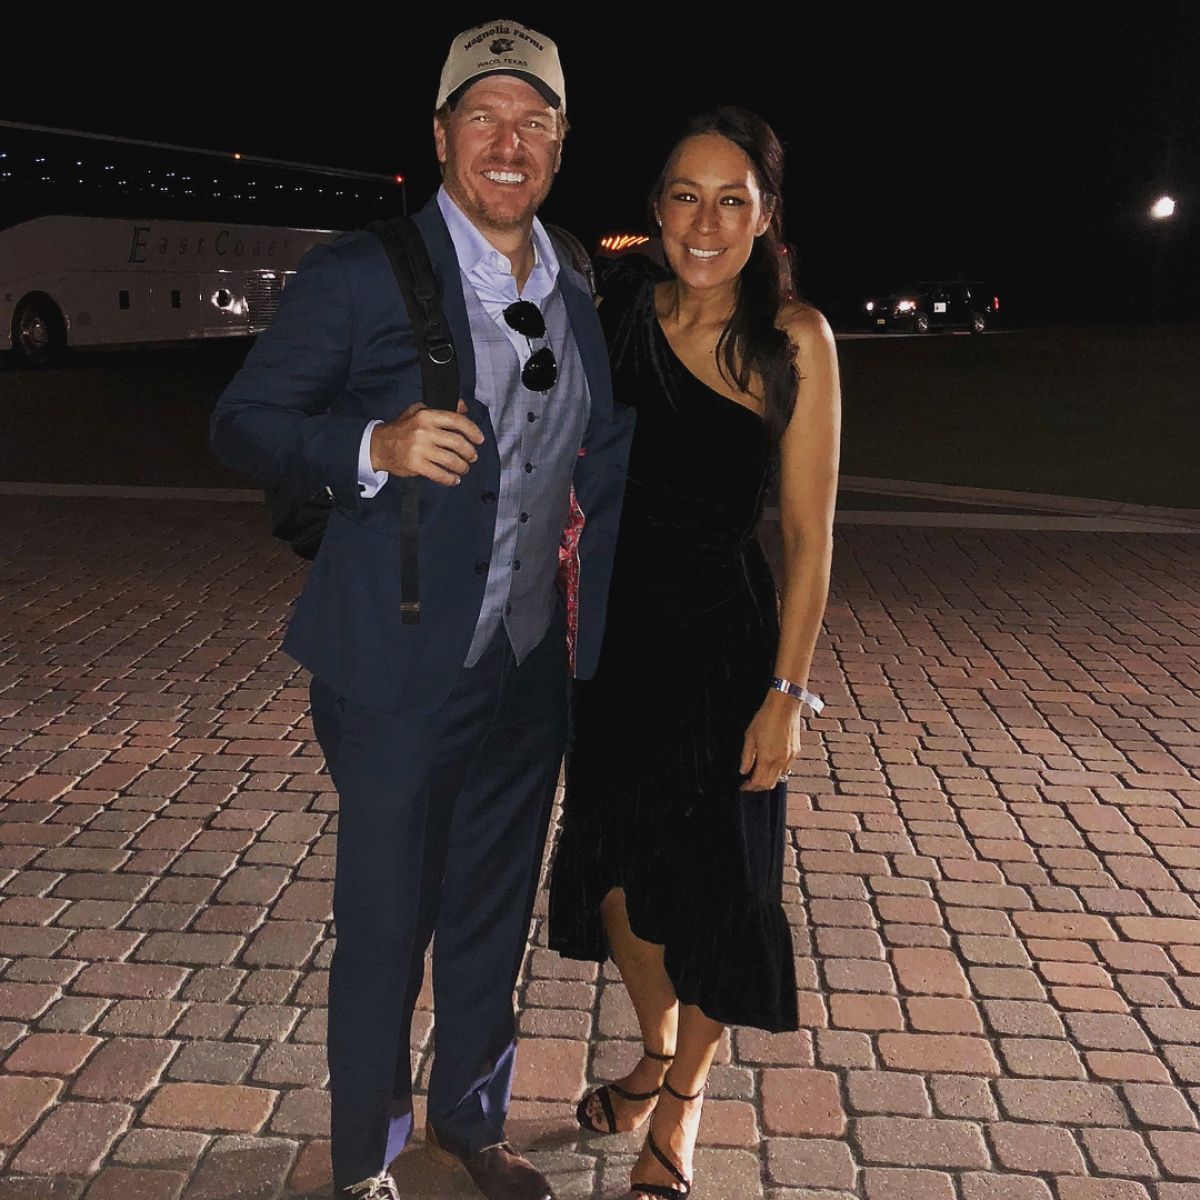 Chip and Joanna have a date night